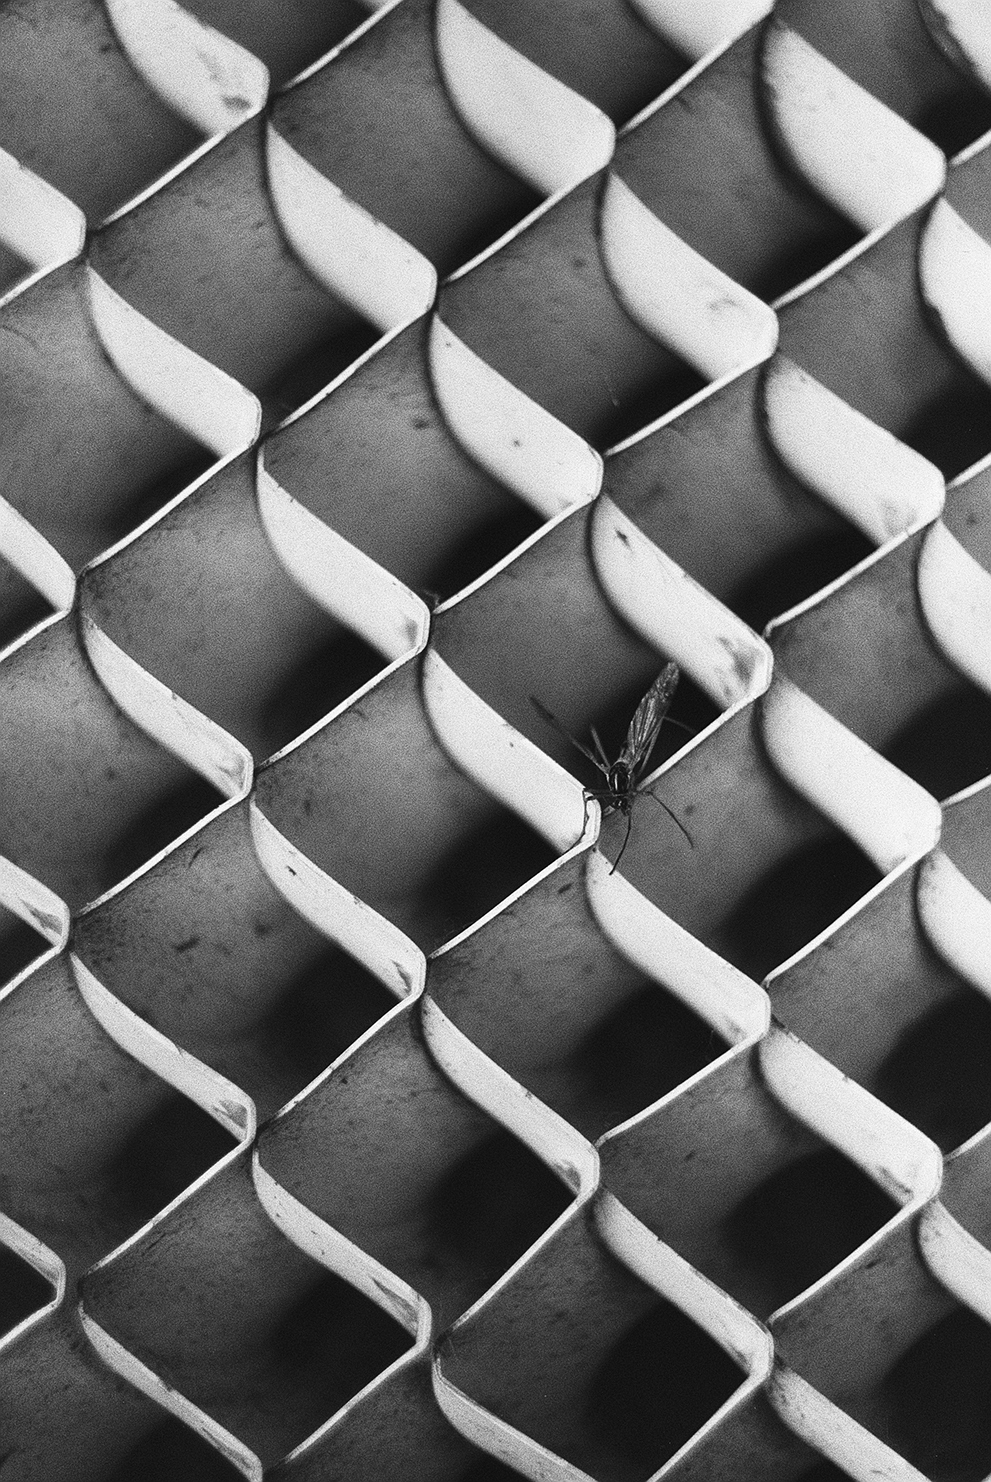 A mosquito setting on the intake grill of a large industrial cooler. Shot Fomapan 400 action.